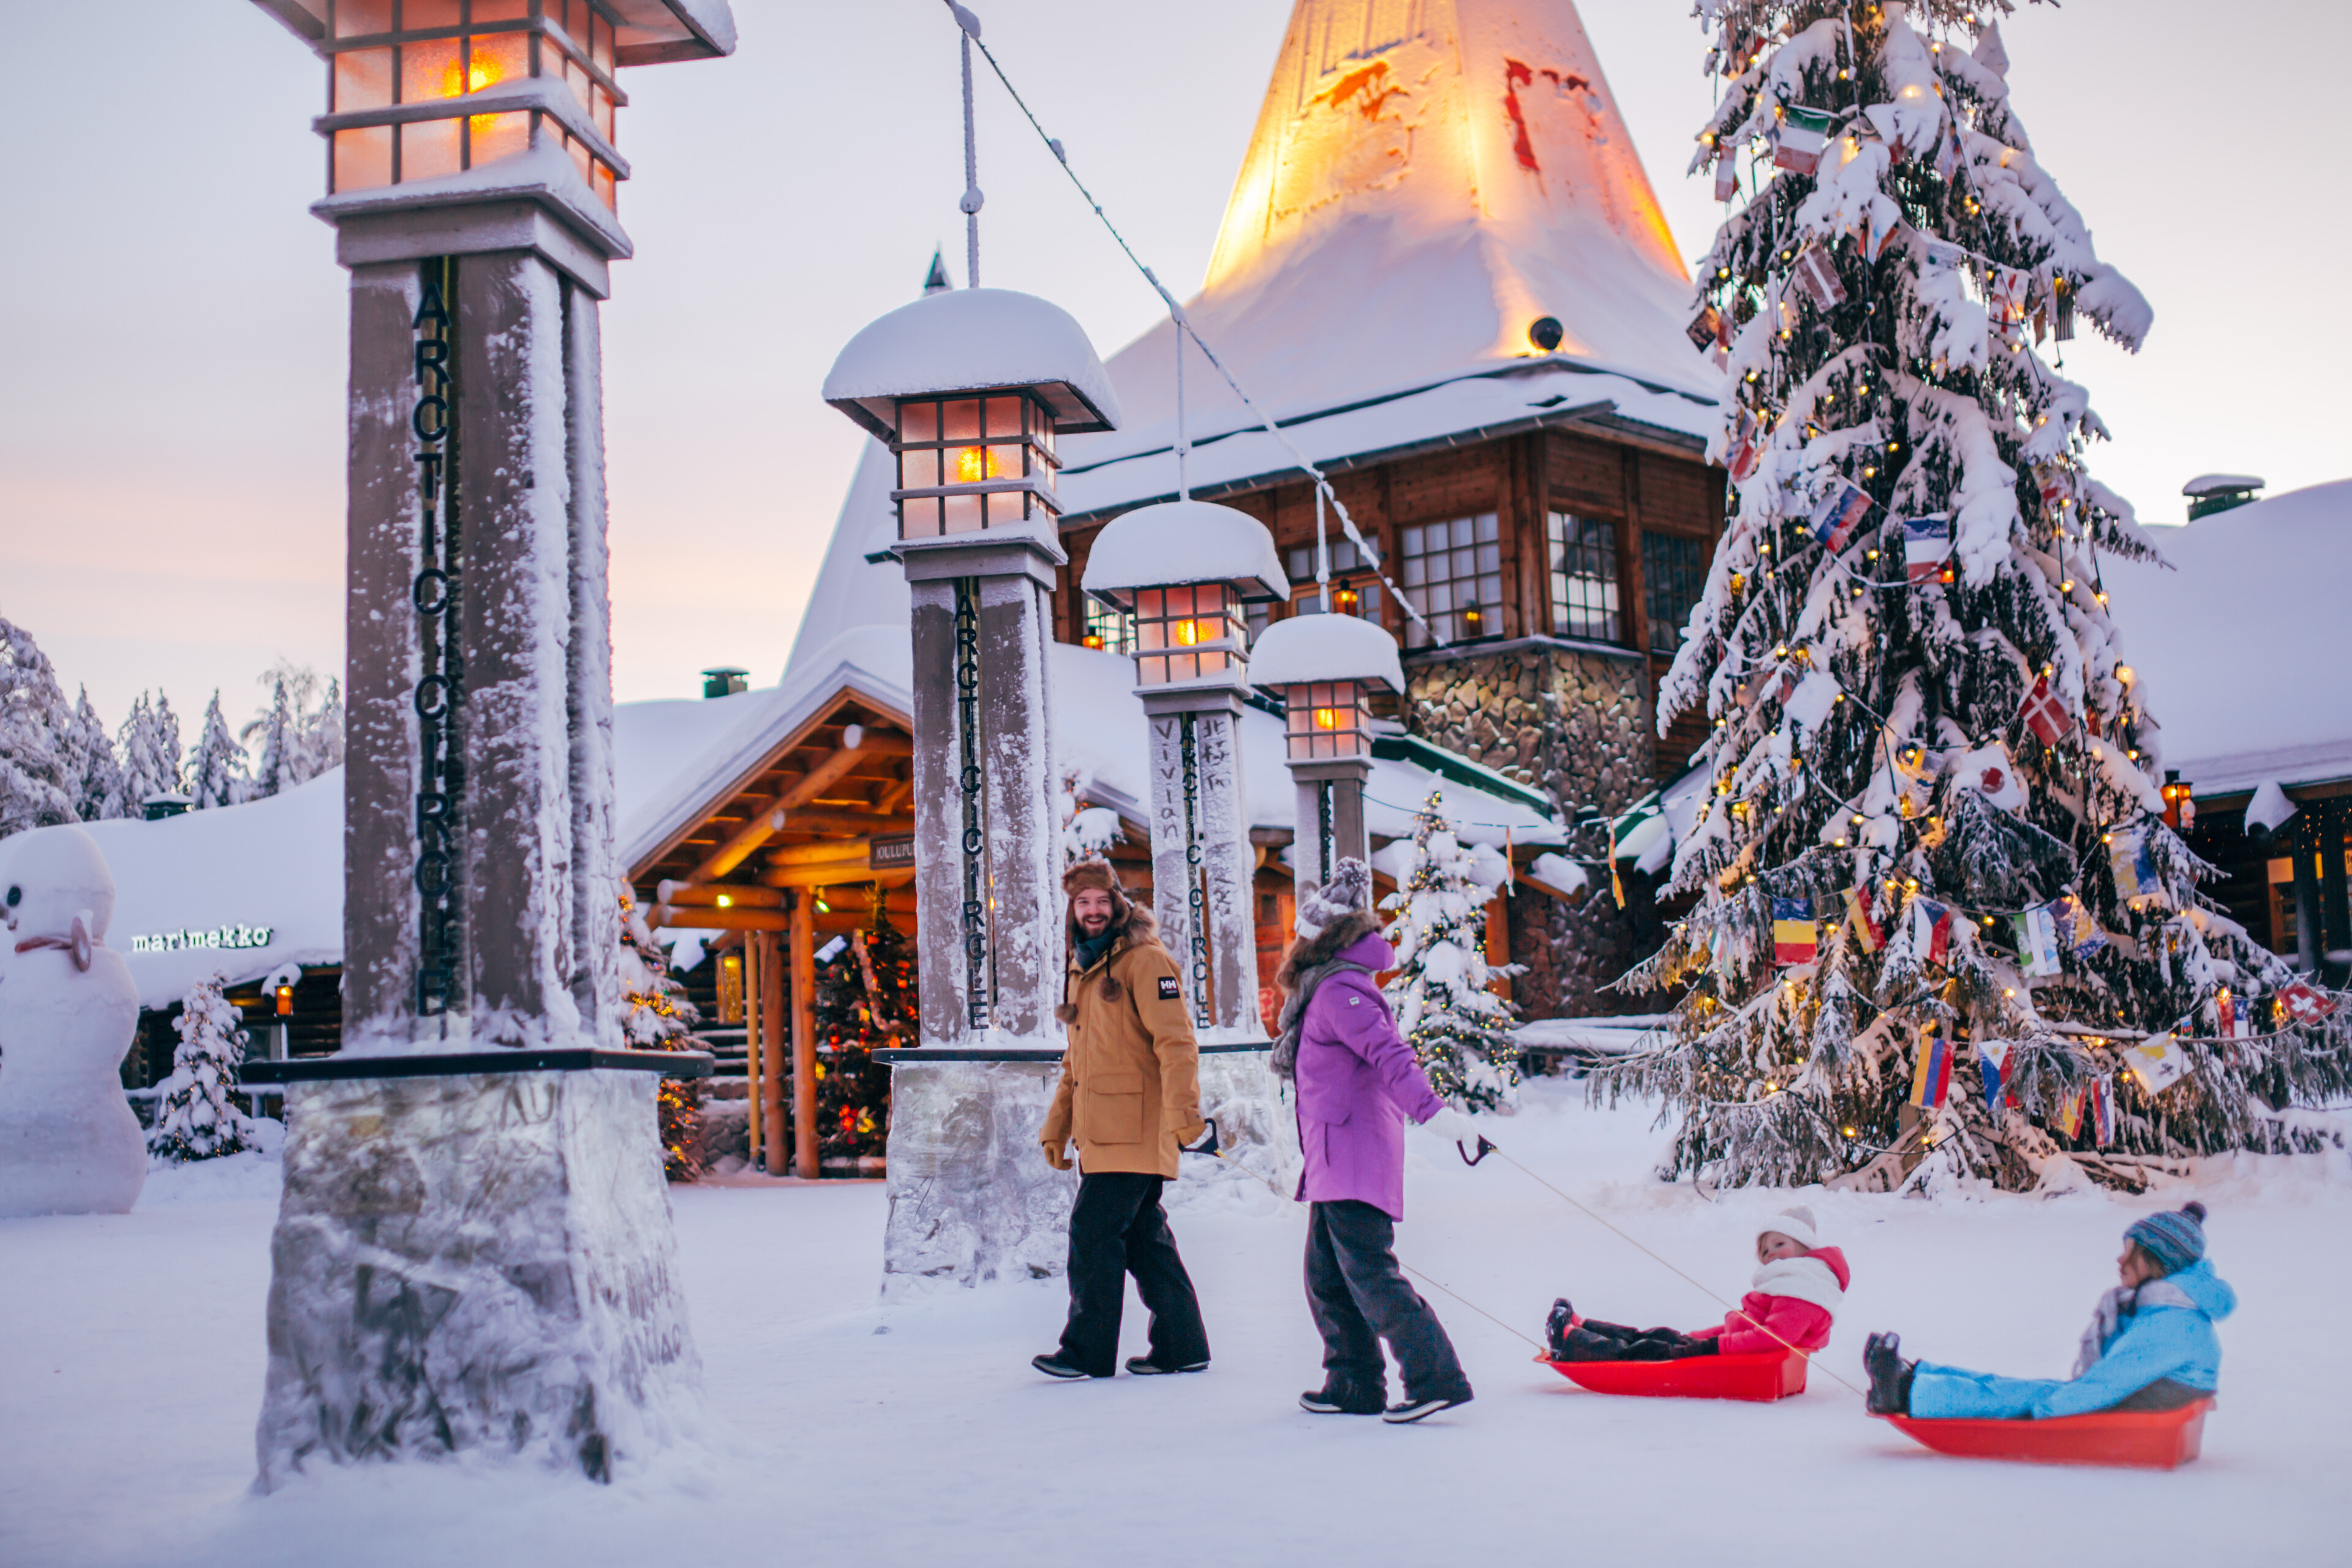 Santa Claus Village at the Arctic Circle with Christmas lights during winter with family and snow in Rovaniemi, Lapland, Finland.